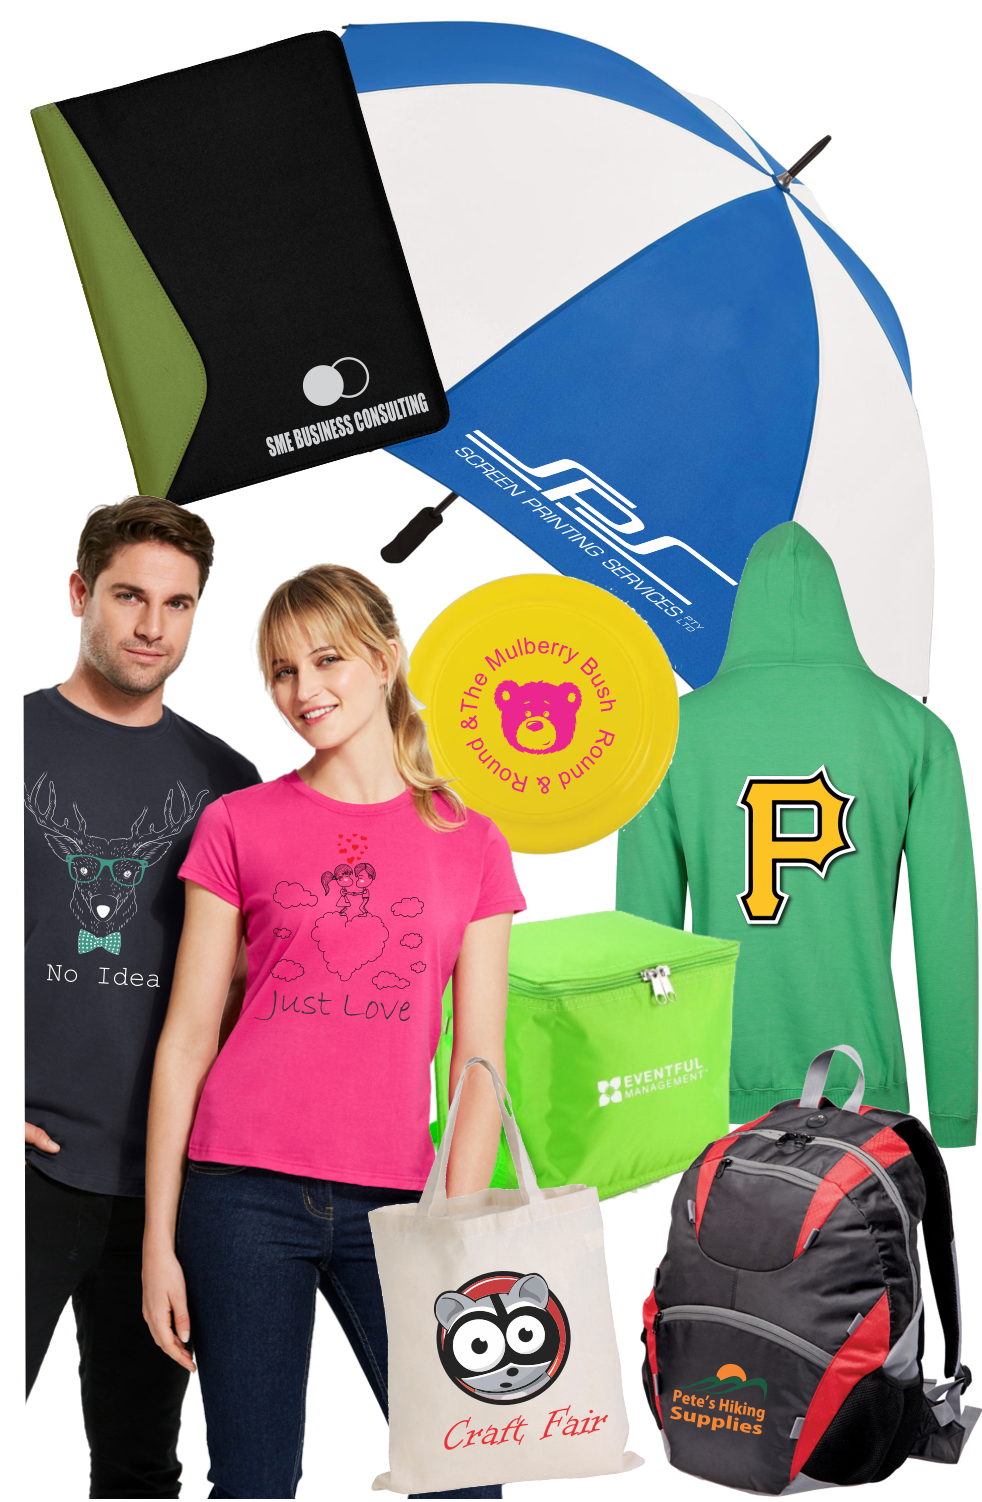 Screen Printing Services | store | 2/45 Tradelink Rd, Hillcrest QLD 4118, Australia | 0738009332 OR +61 7 3800 9332